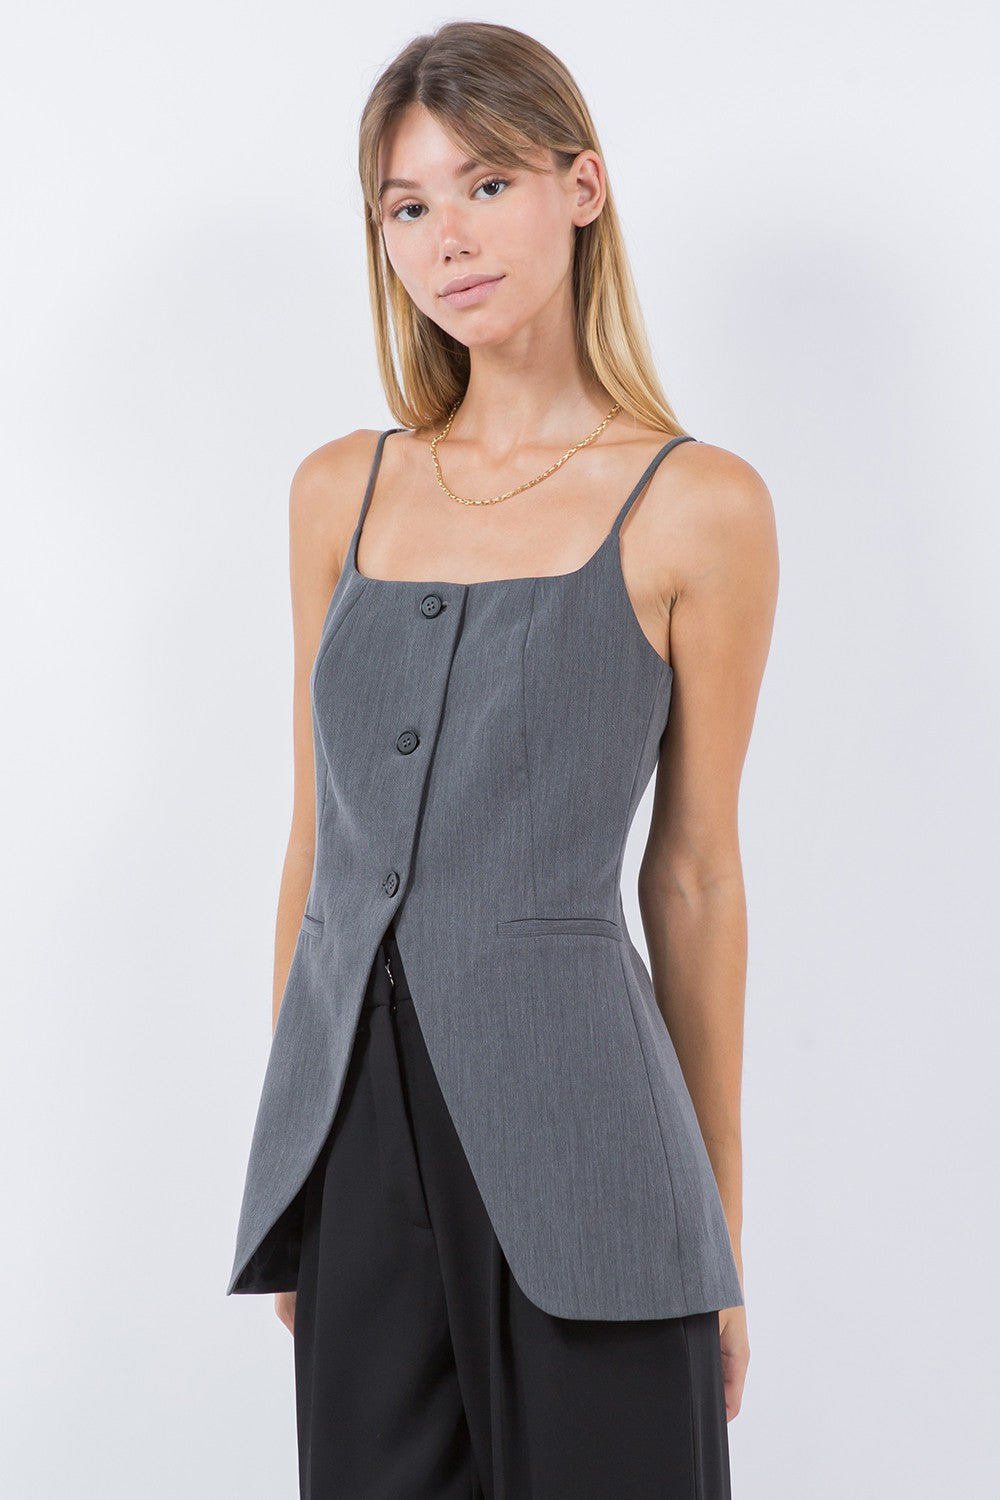 Top Chaleco Slit Open Front Gris Carly